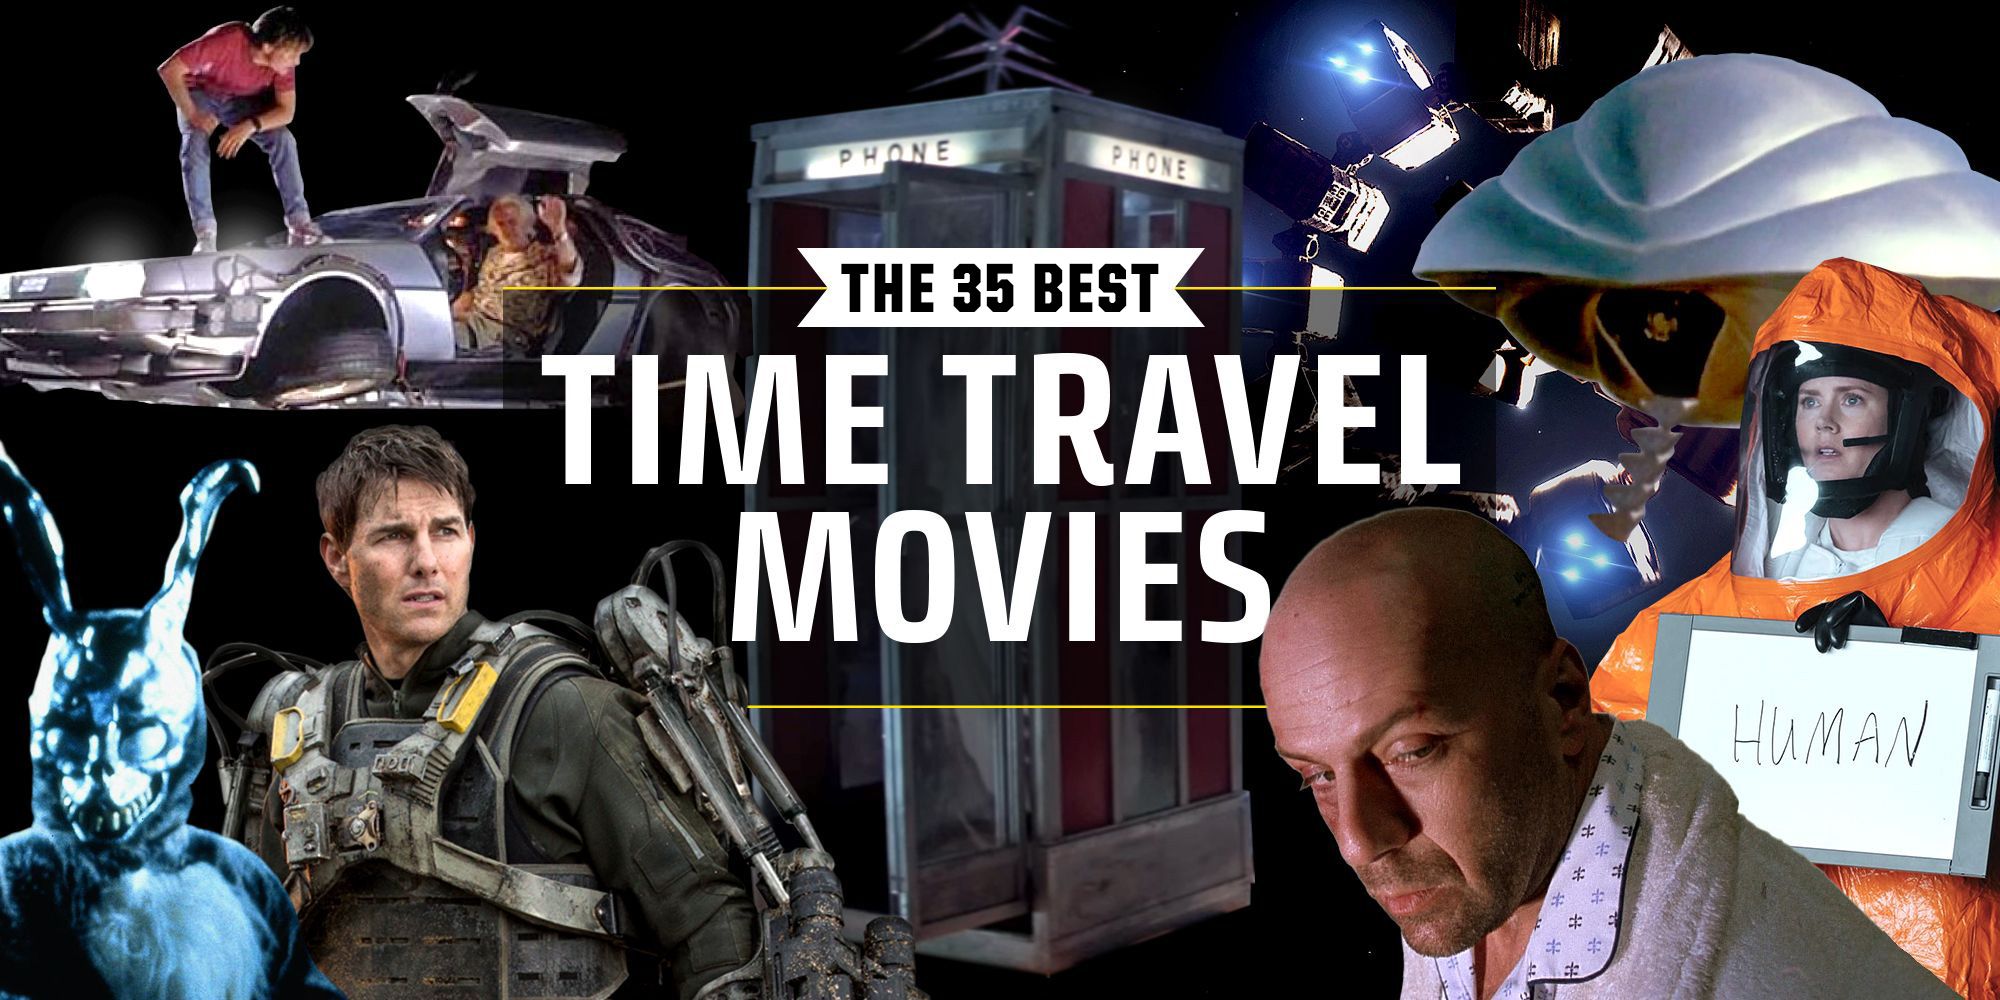 The 35 Best Time Travel Movies